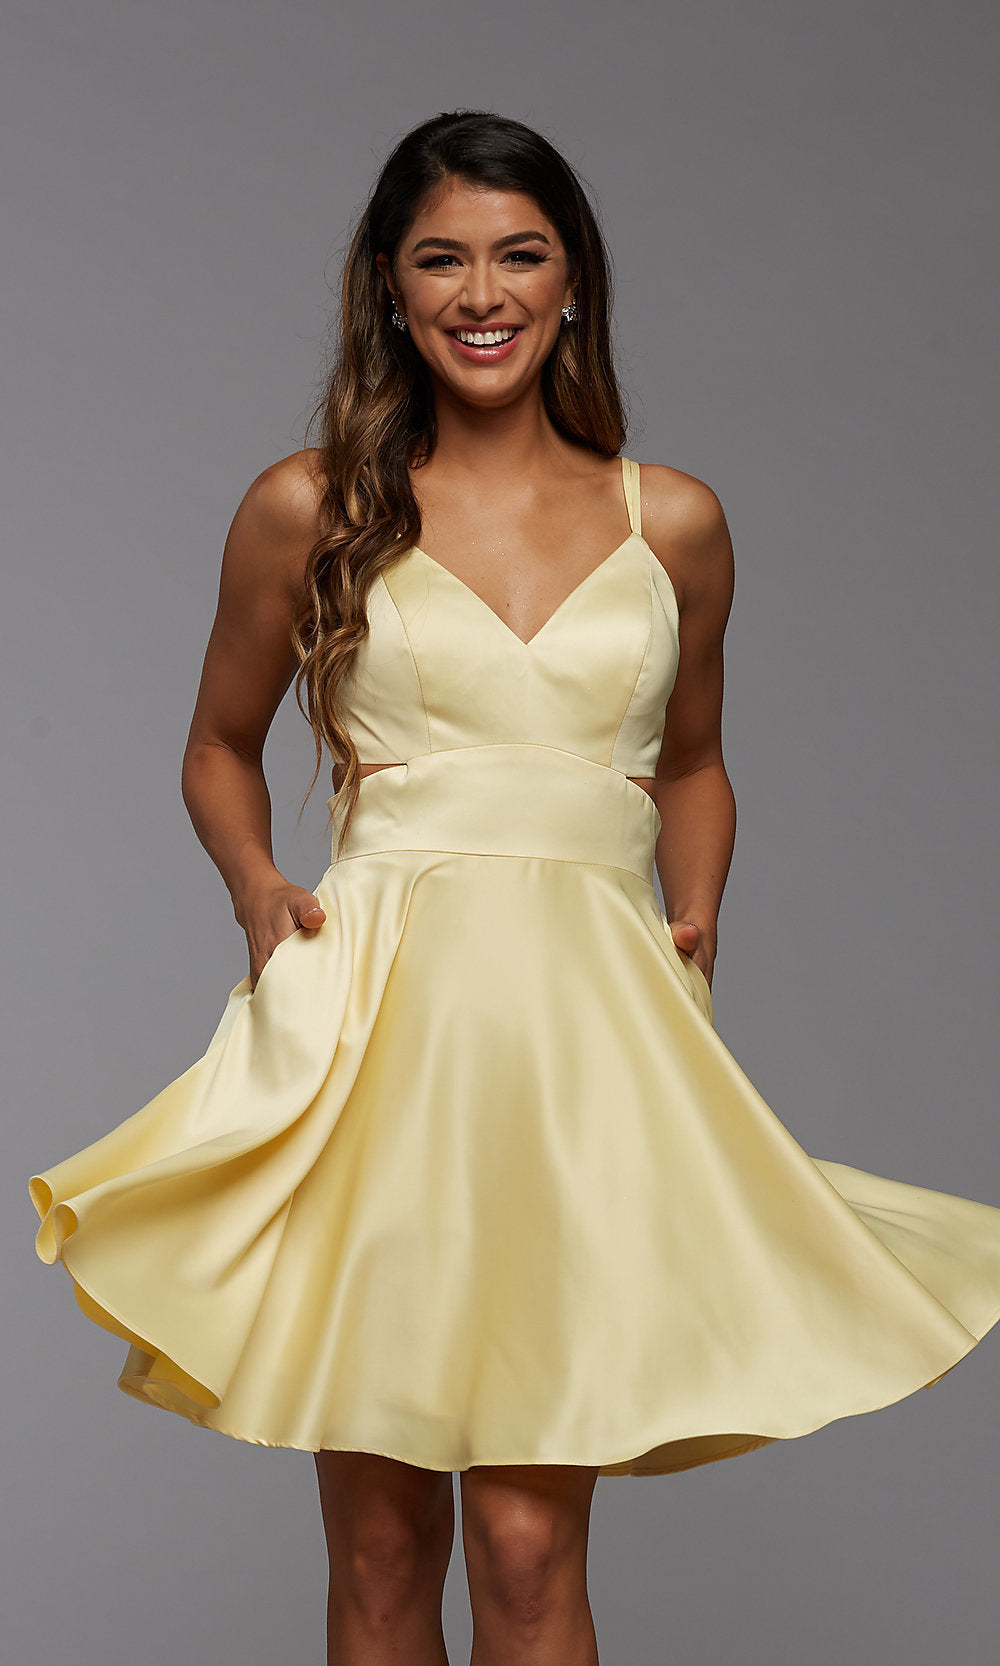 21+ Homecoming Dresses With Cutouts